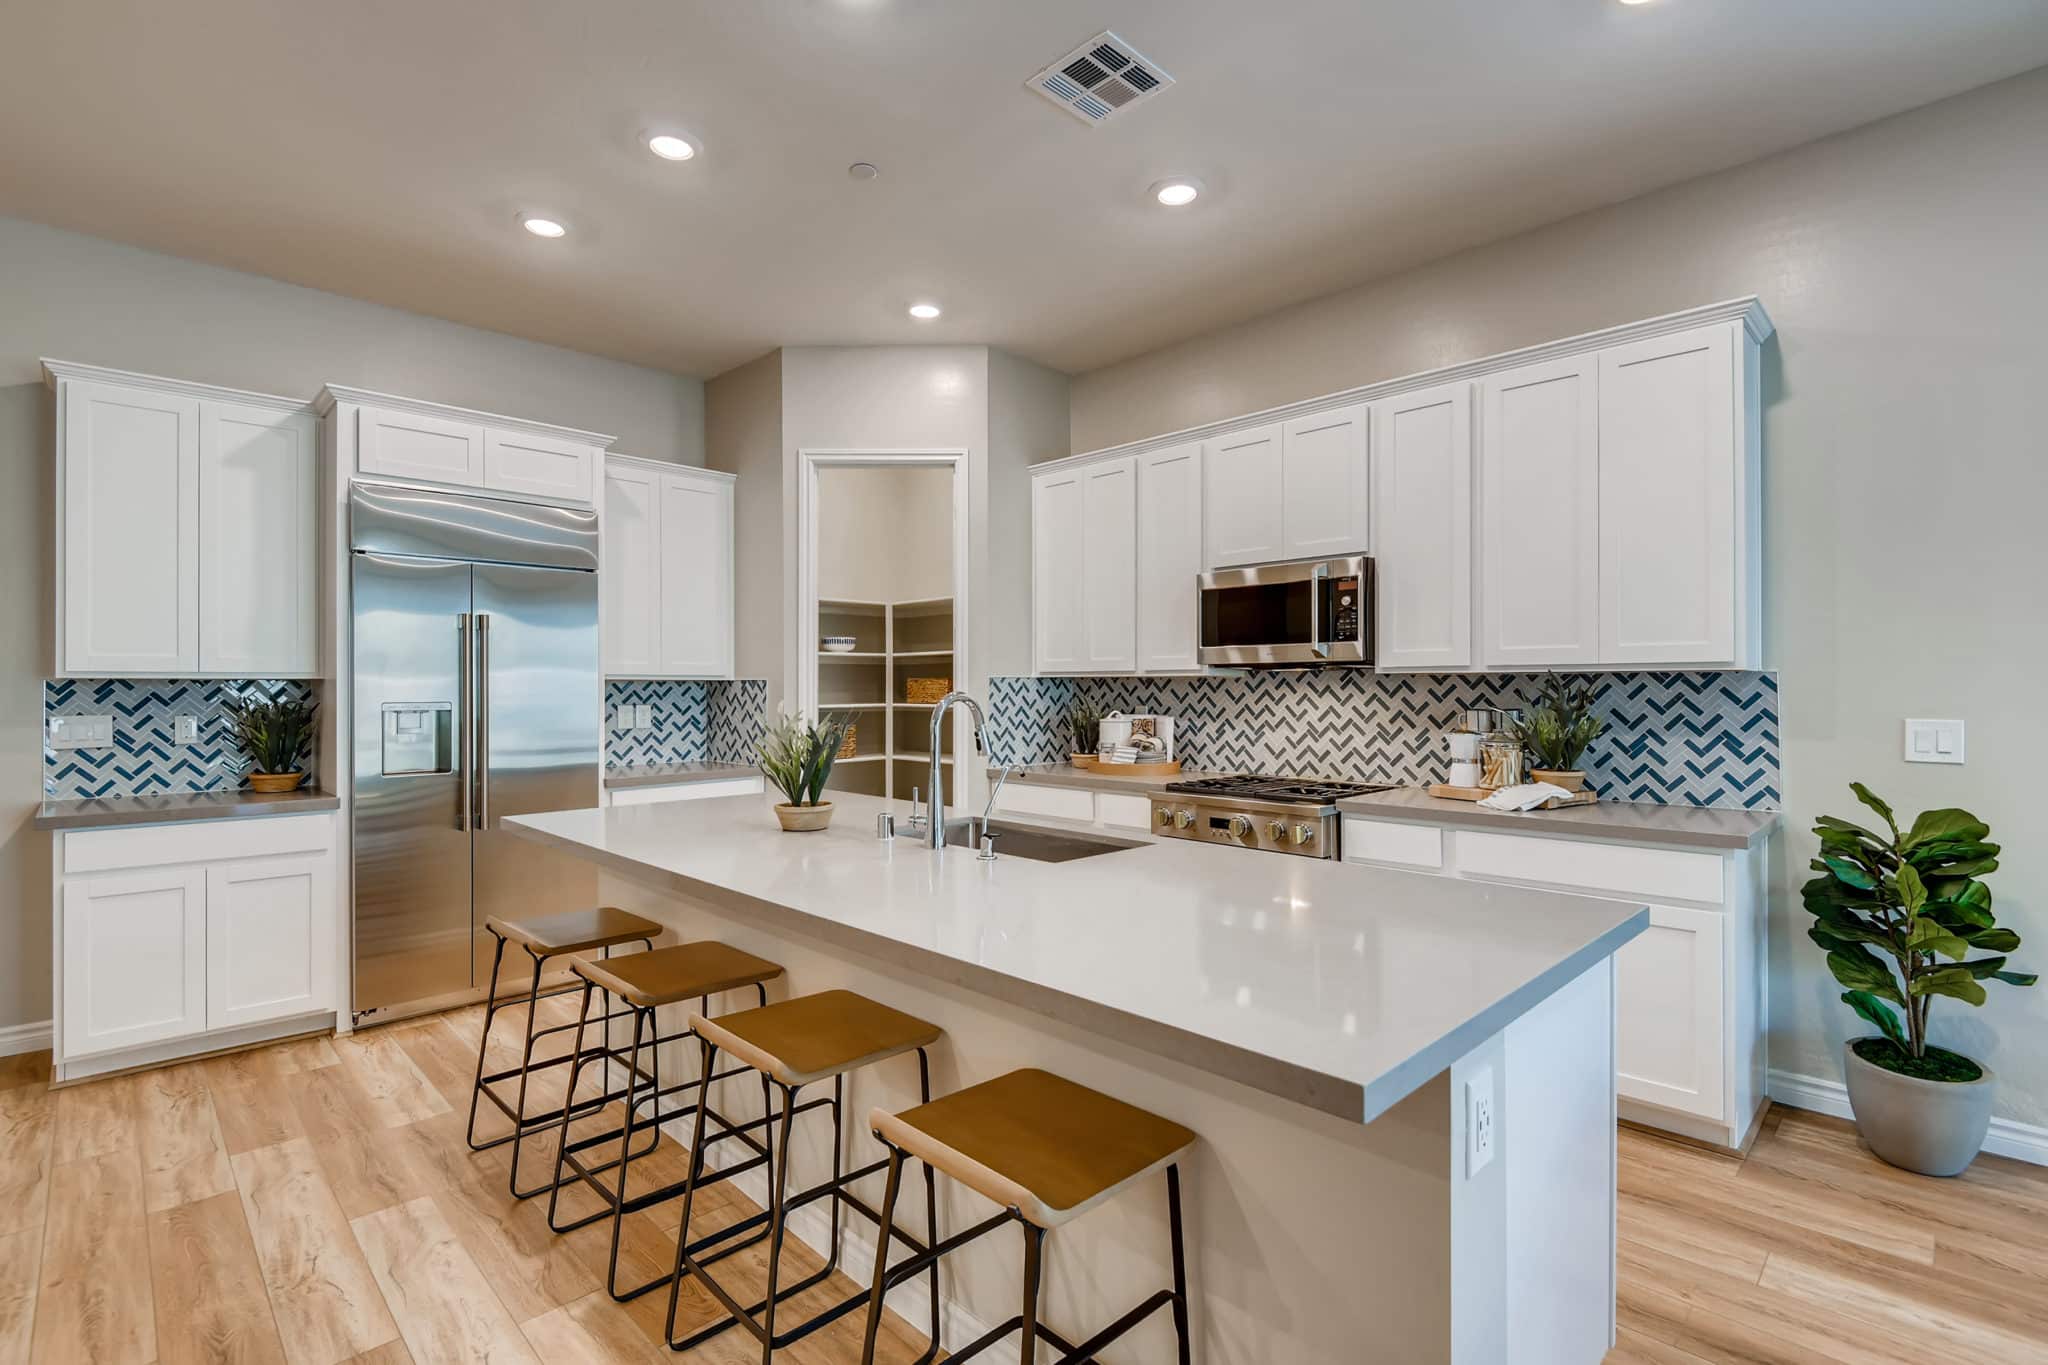 Kitchen of Sidney model at Heritage by Lennar